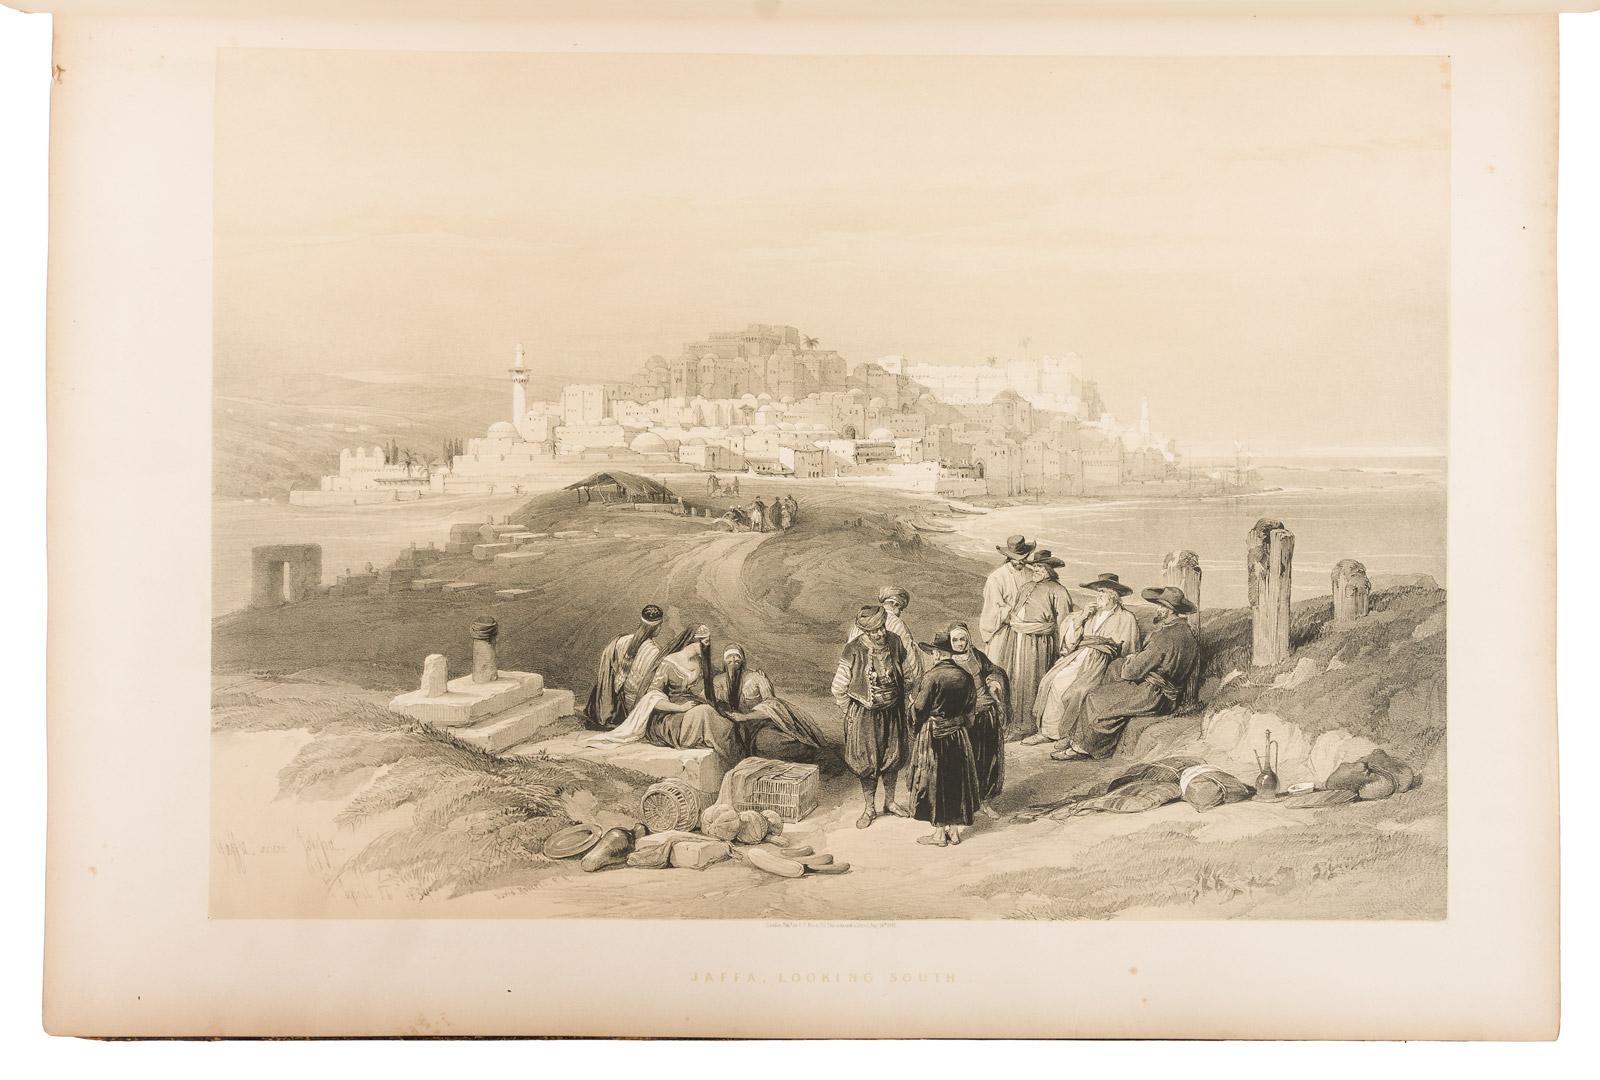 Illustration from 'The Holy Land' by David Roberts. Estimate: $15,000-$20,000. PBA Galleries image 